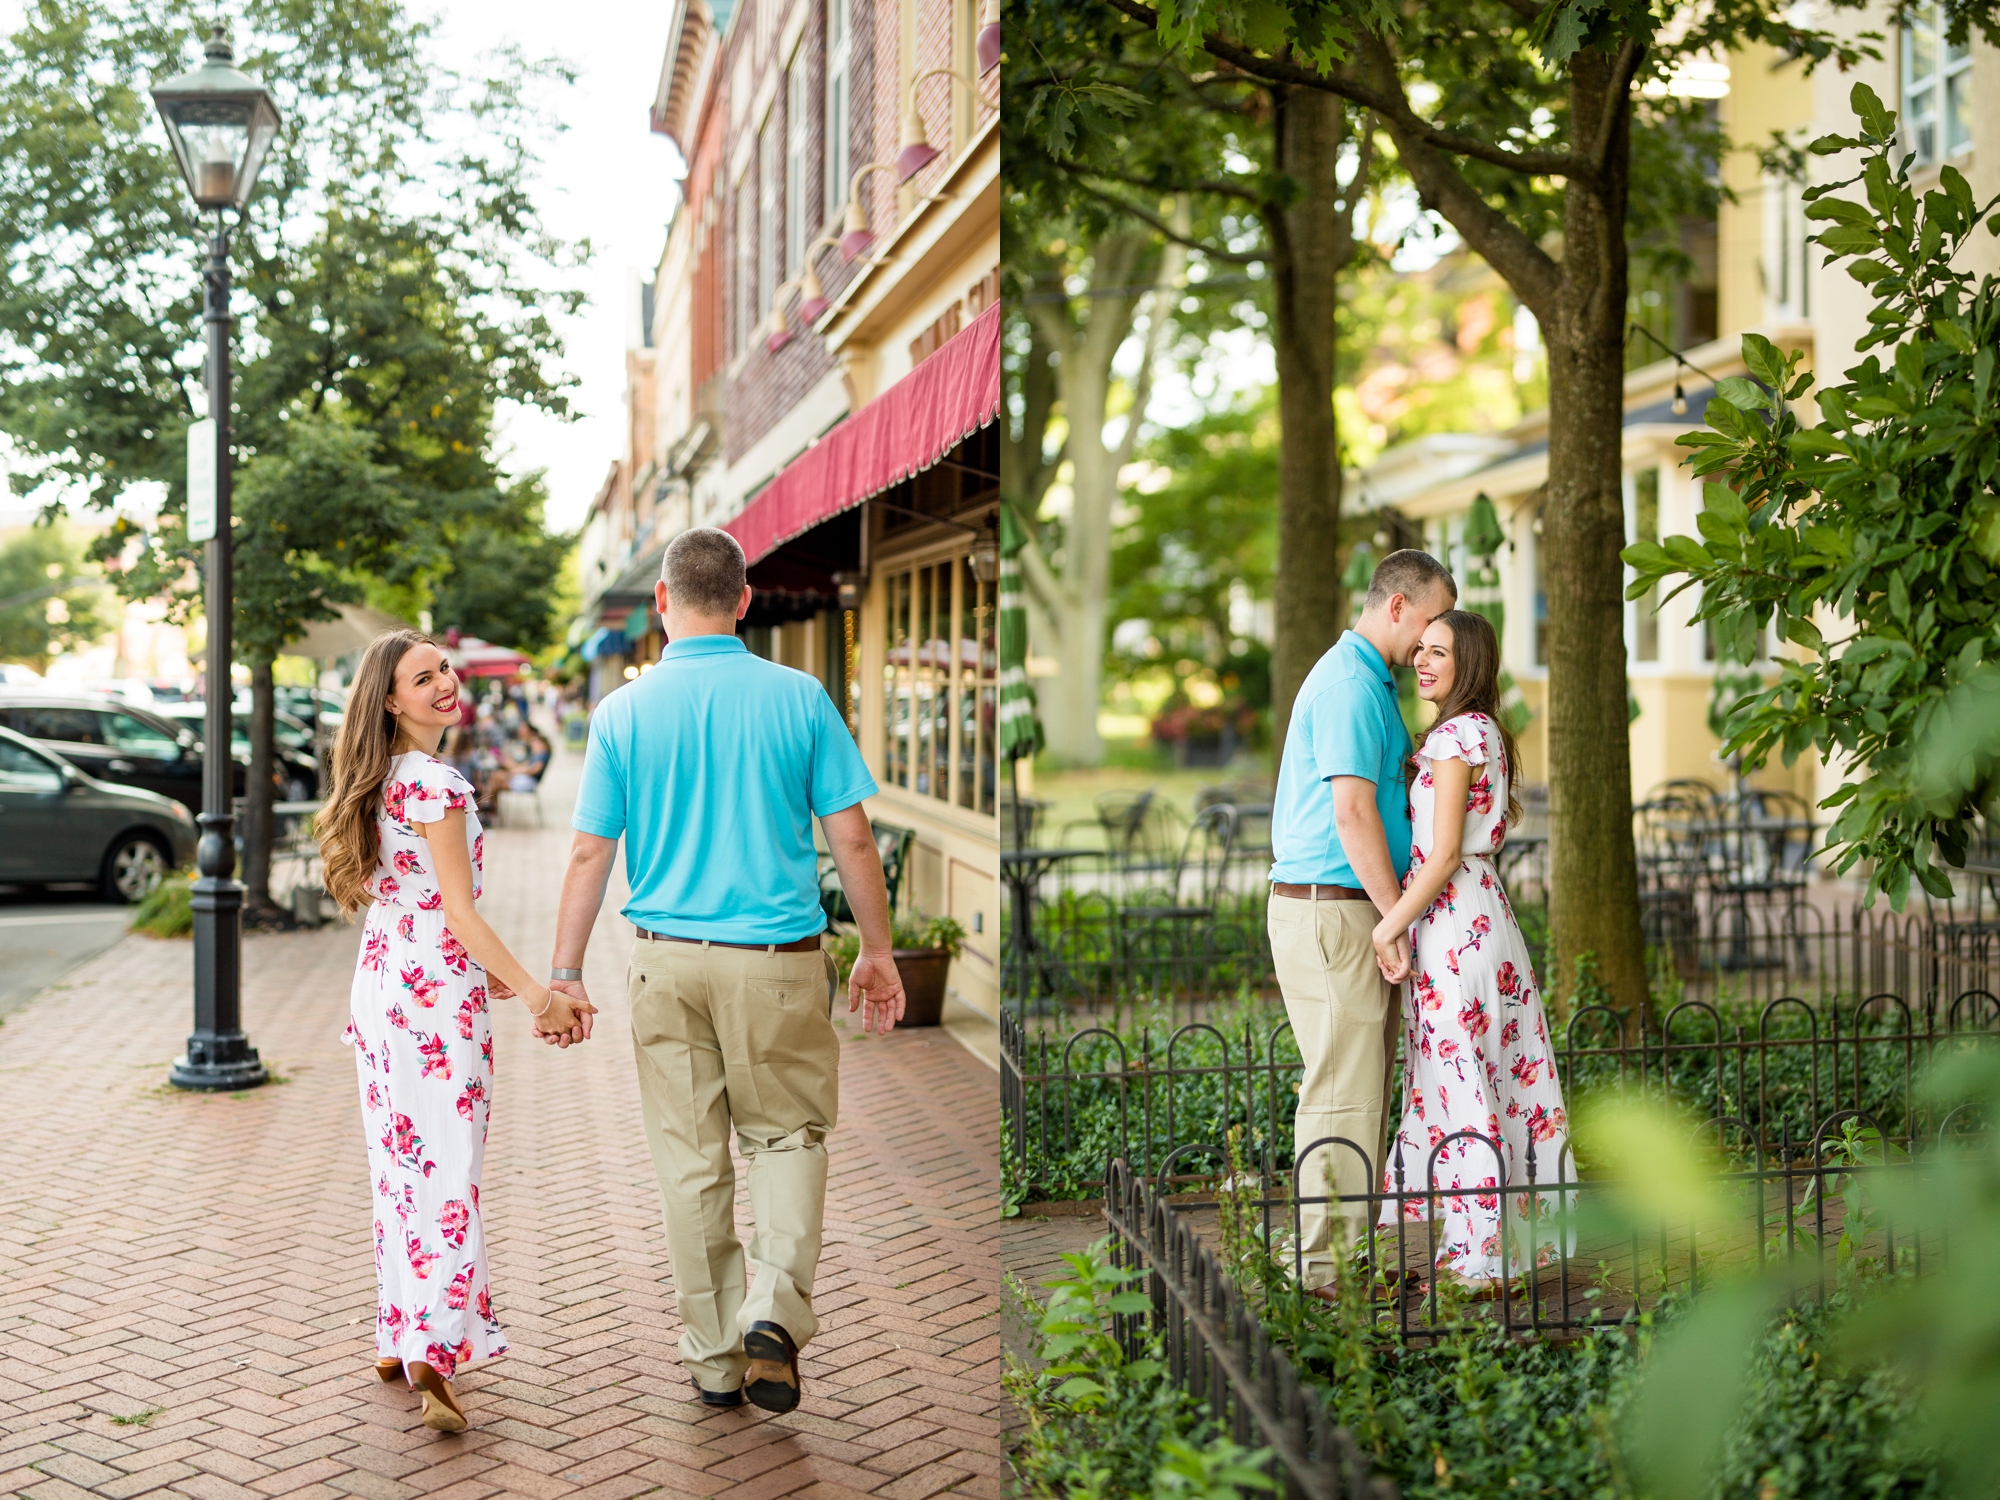 downtown beaver pa engagement photos, downtown beaver pa wedding photos, best location for photoshoot in pittsburgh, pittsburgh wedding photographer